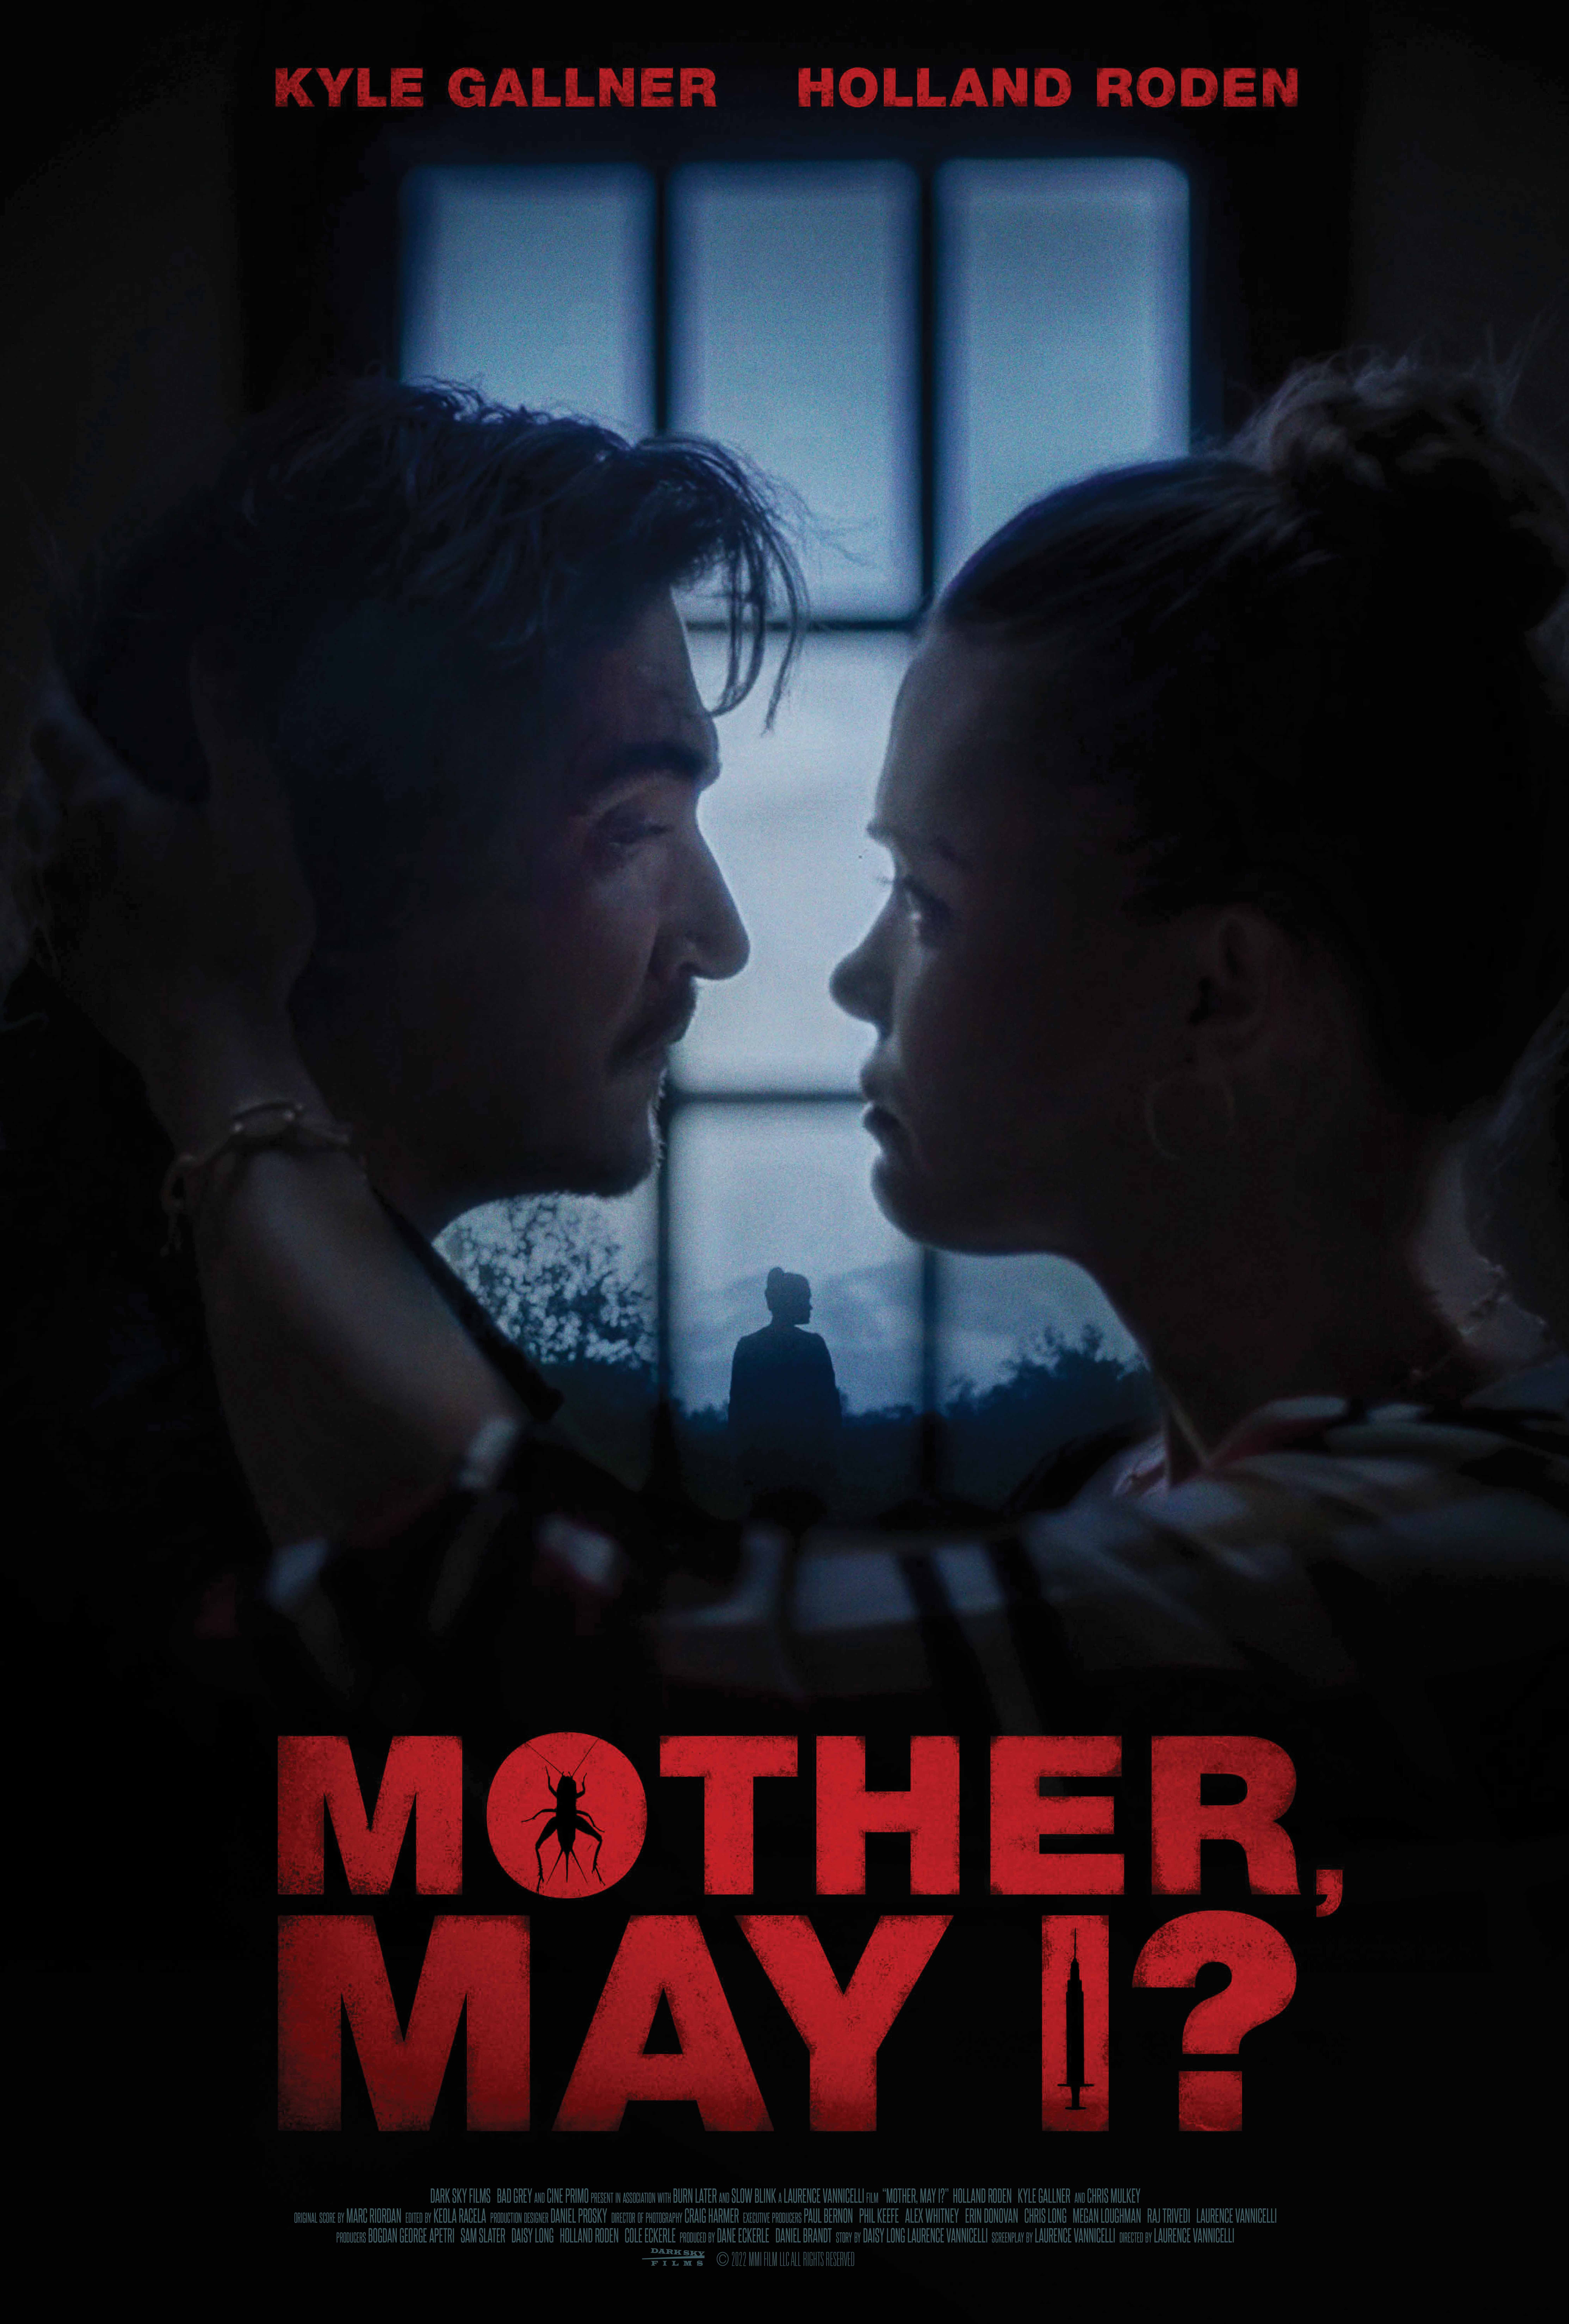 "Mother, May I?" - A Riveting Psychological Thriller Featuring Kyle Gallner and Holland Roden Set to Hit Theaters and VOD on July 21st 37